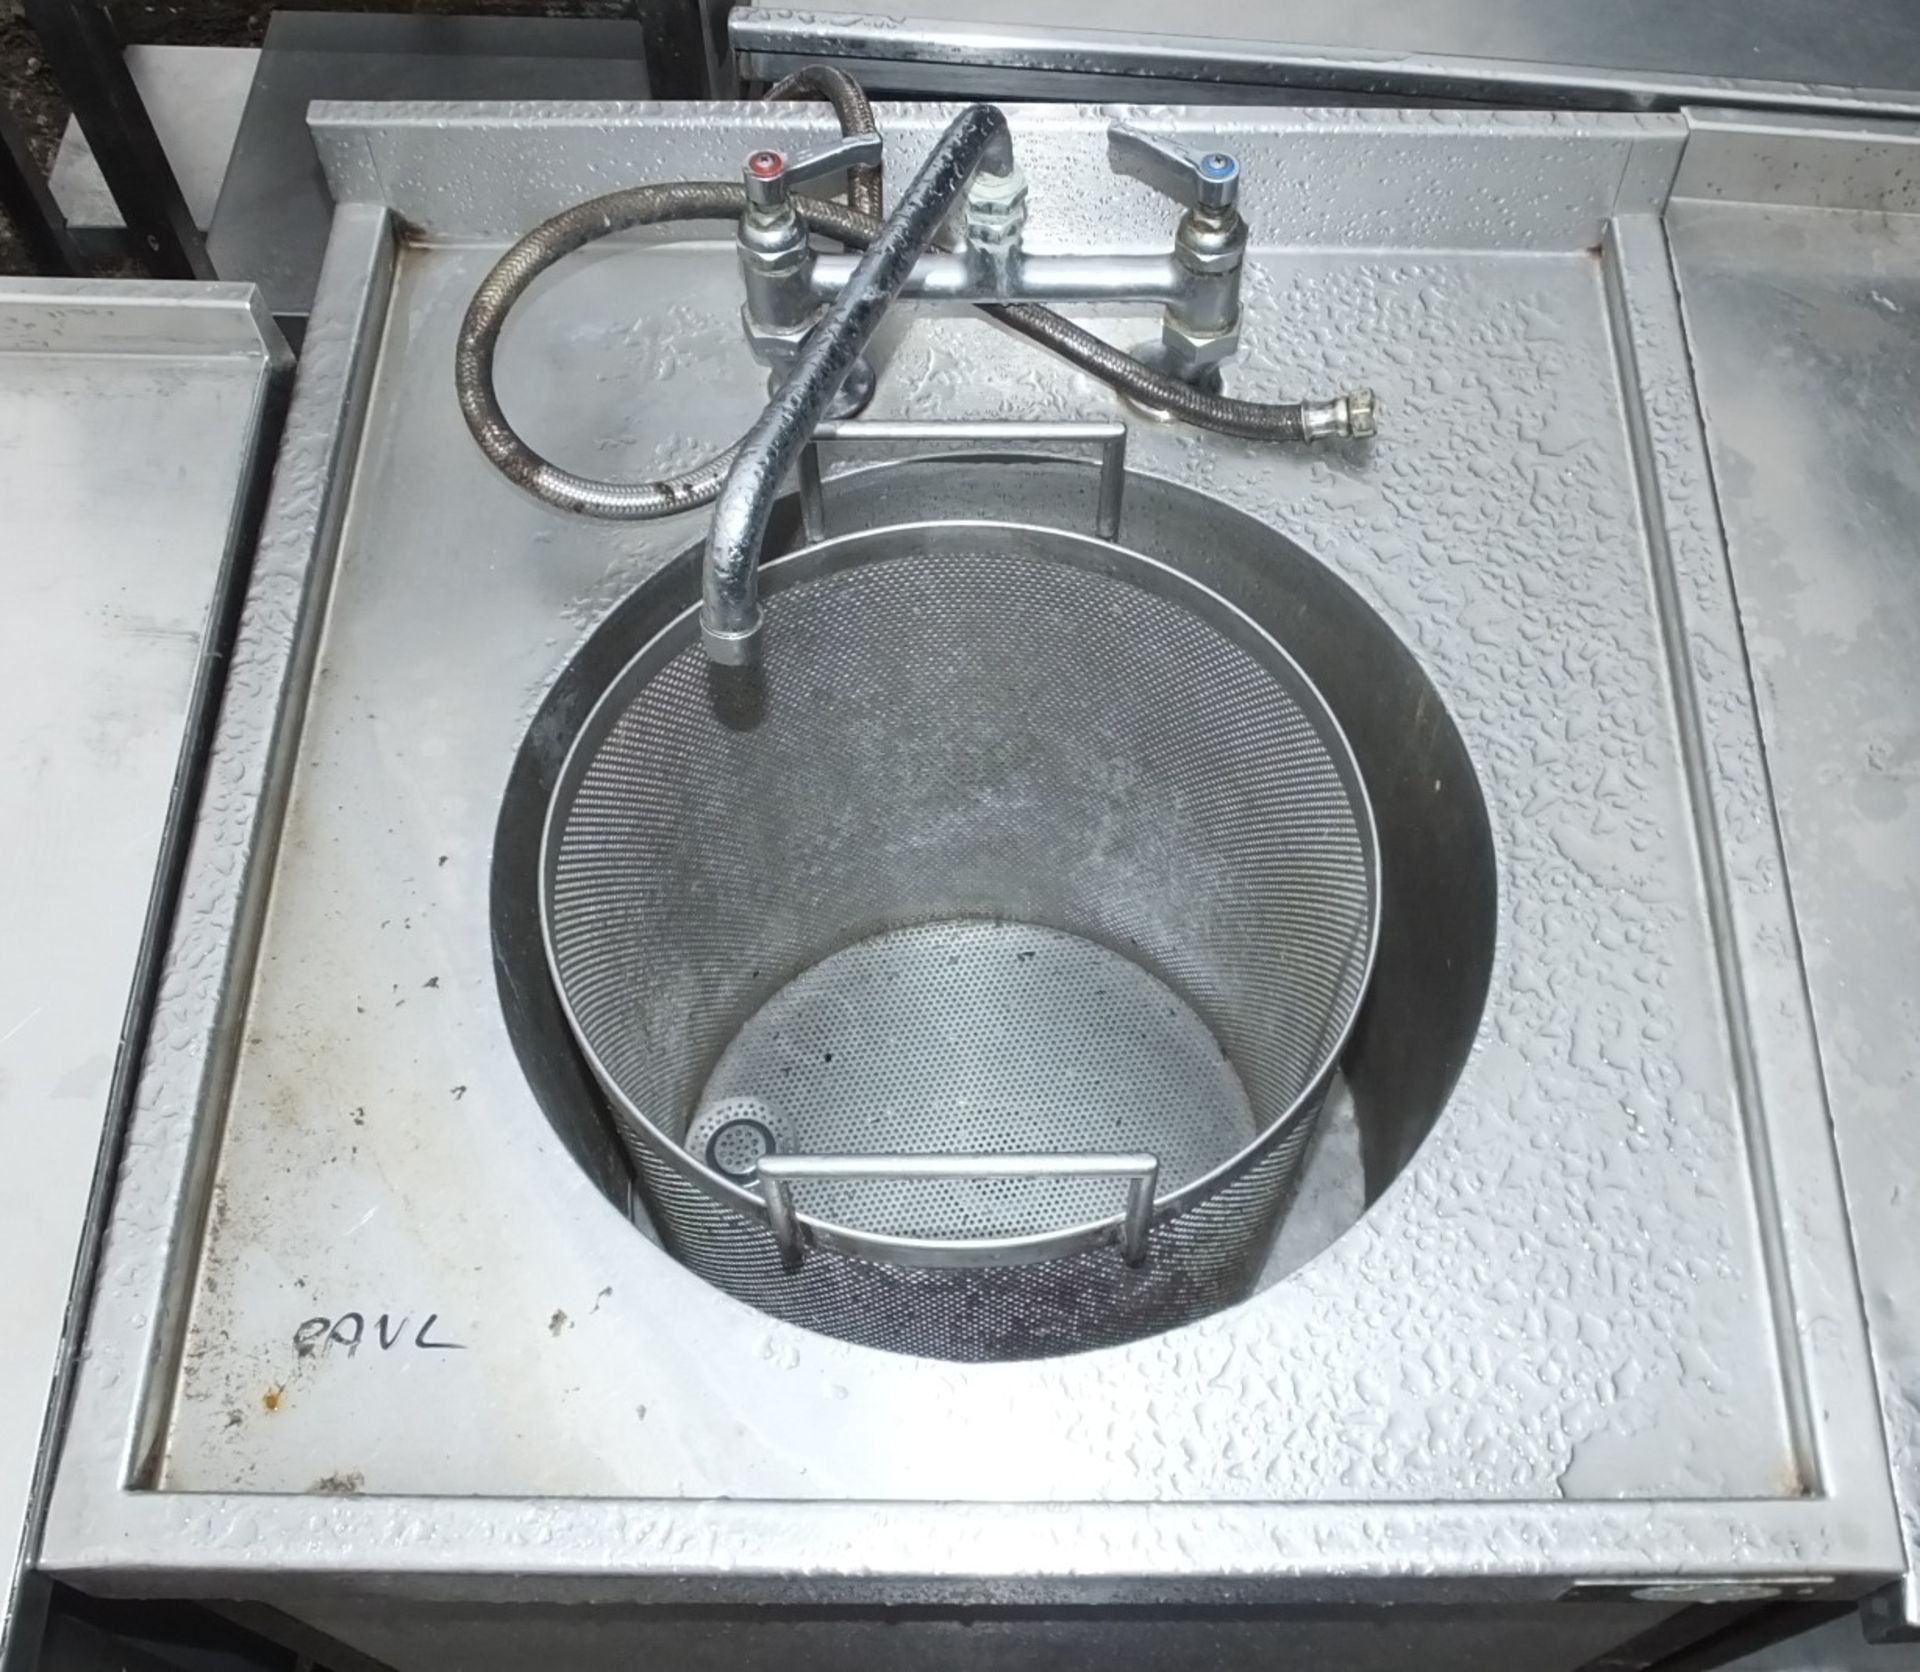 Sink with drainer unit - 700mm x 700mm x 870mm high - Image 2 of 2